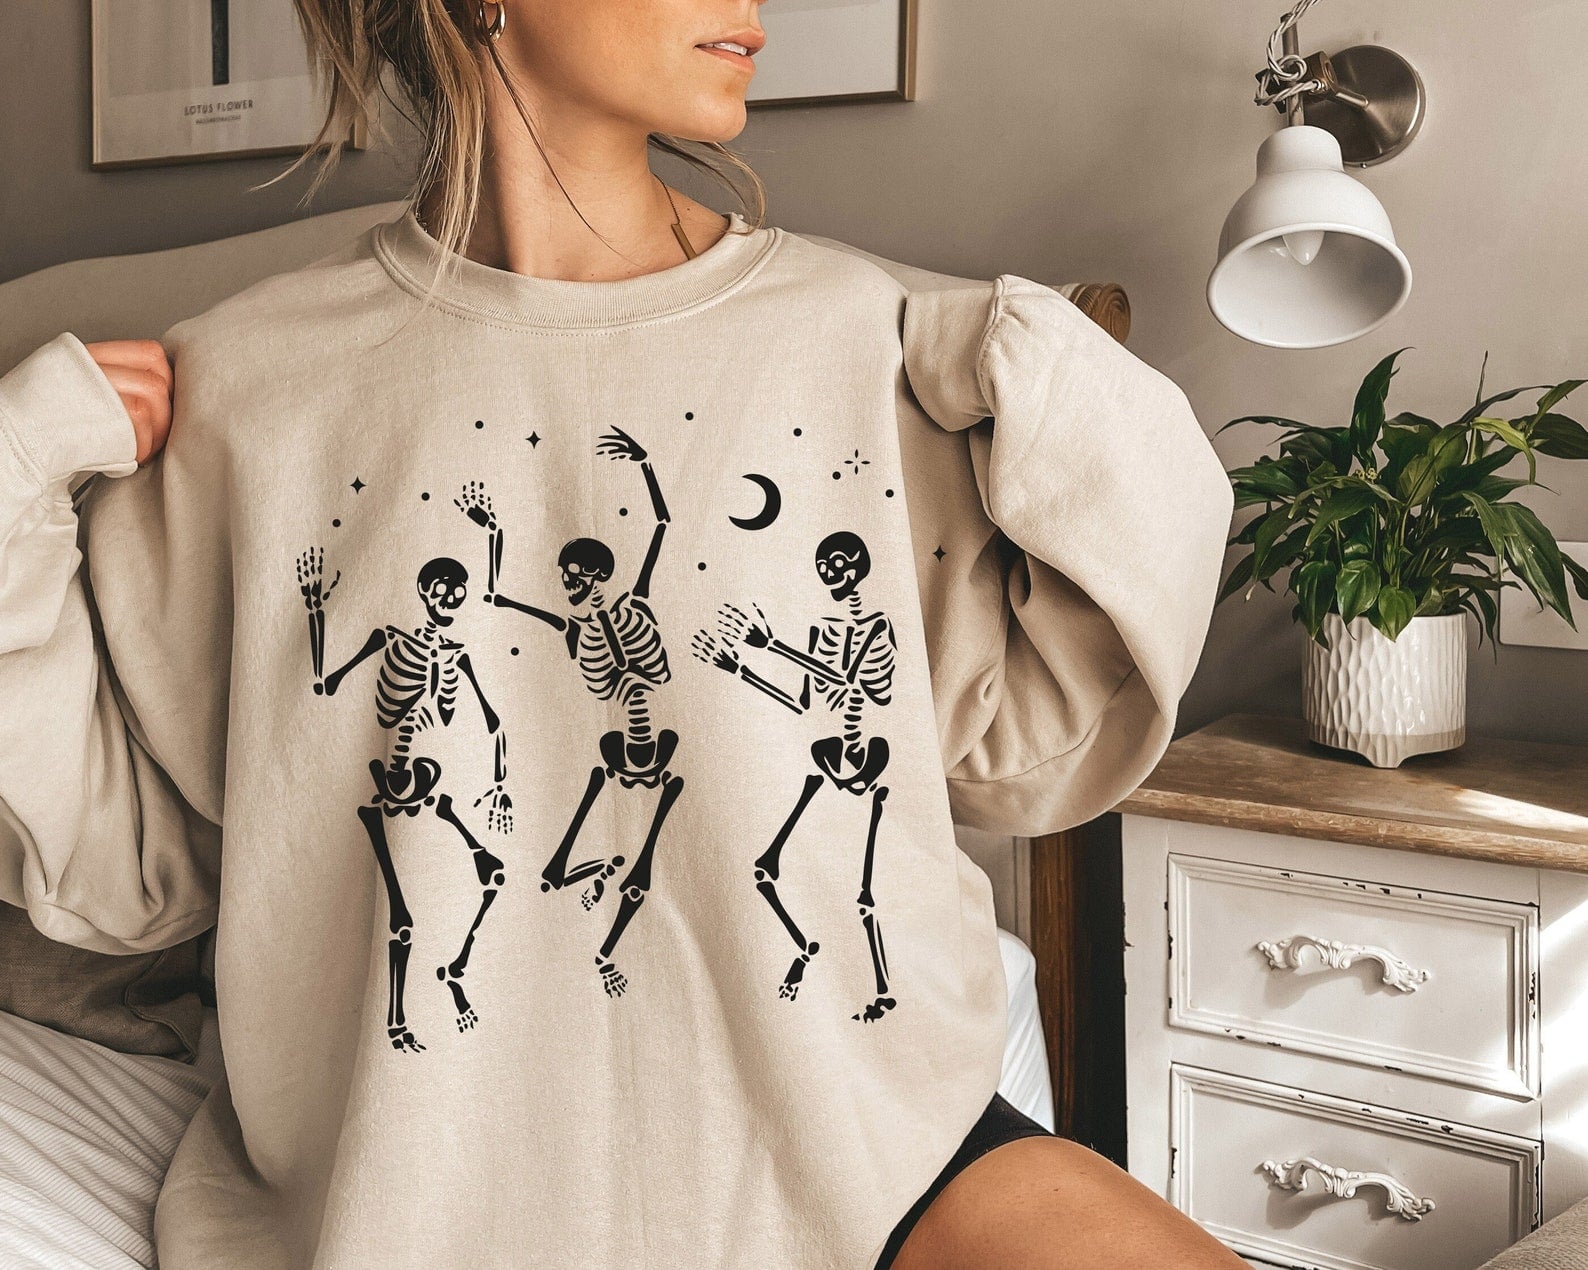 A Find: Dancing Skeleton Sweatshirt | Downright Eerie-sistible Halloween Finds From Etsy Are Too Cute to Skip | Smart Living Photo 18